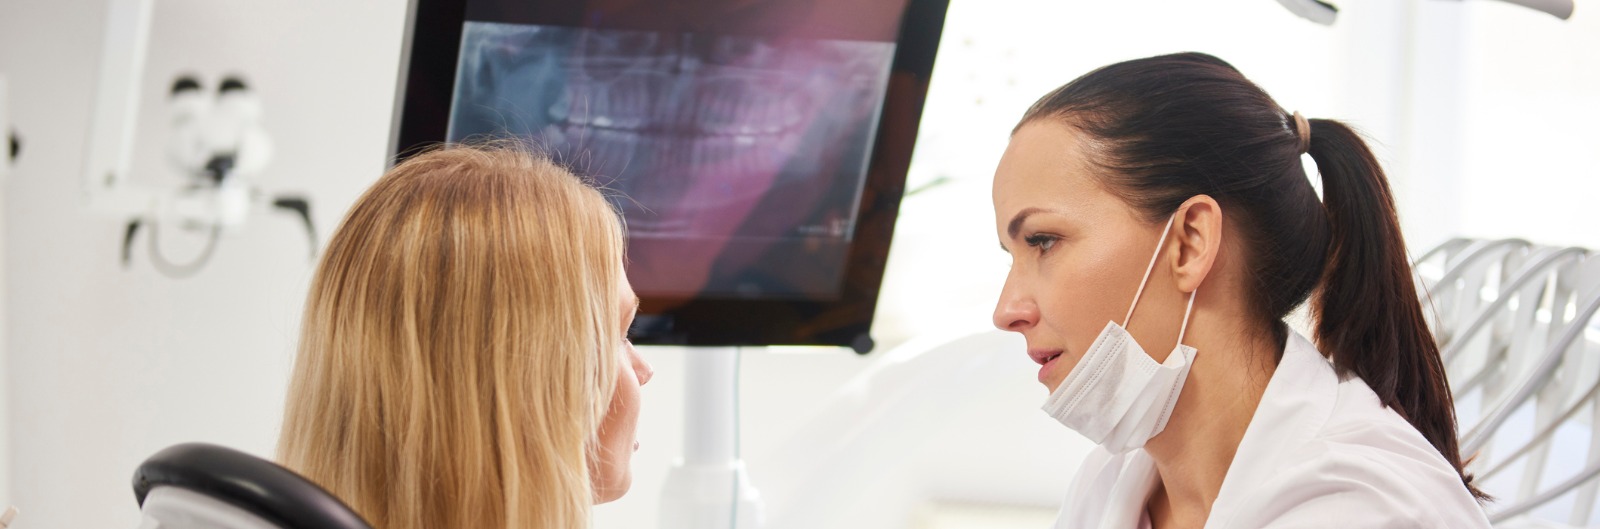 dentist-talking-to-worried-woman-during-dental-checkup-picture-1600x529.jpg